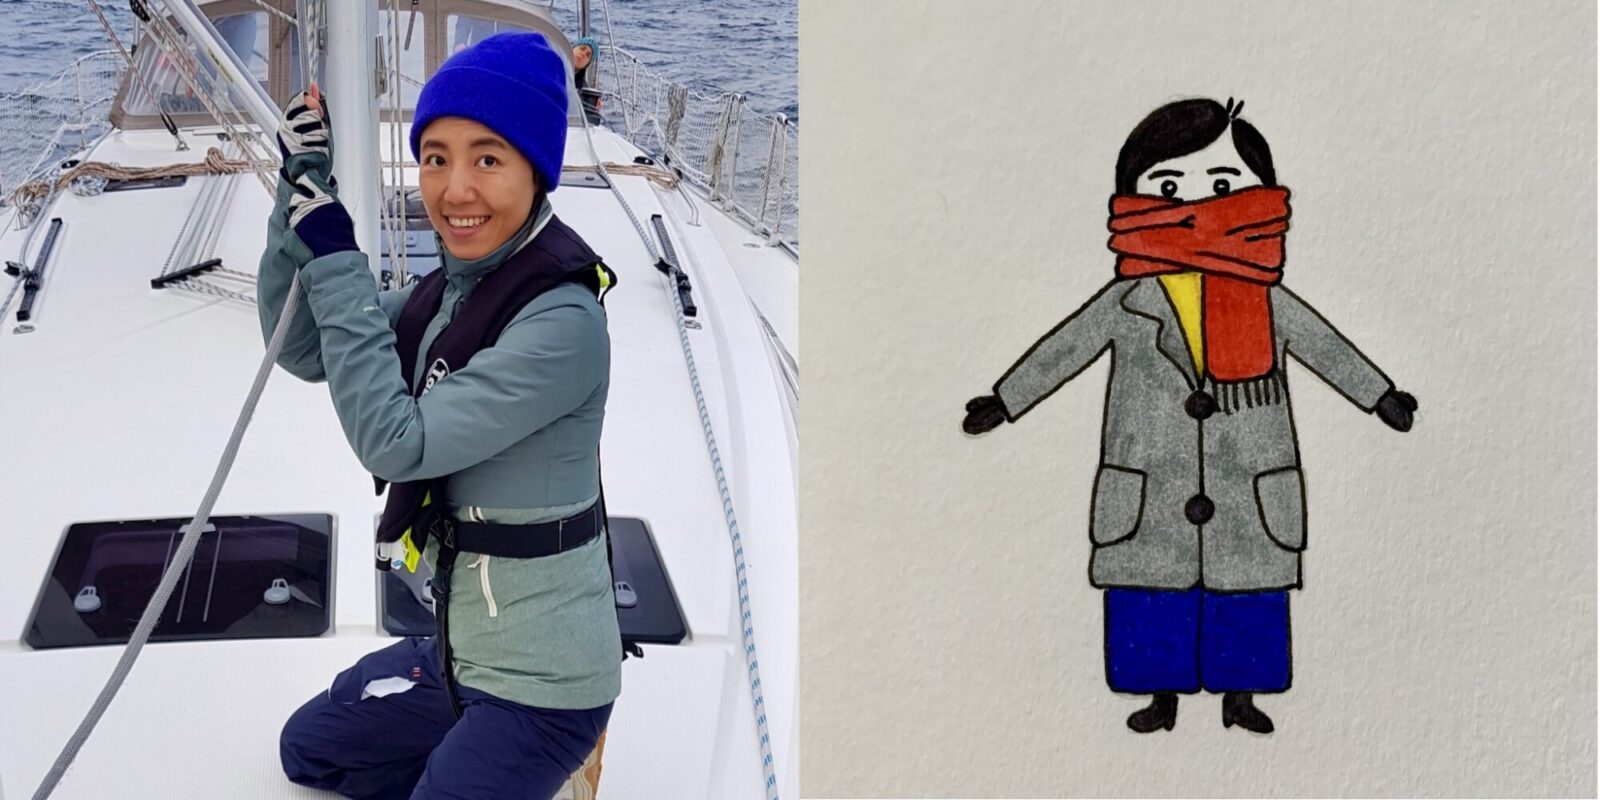 Fei sailing, and Fei as her cartoon character